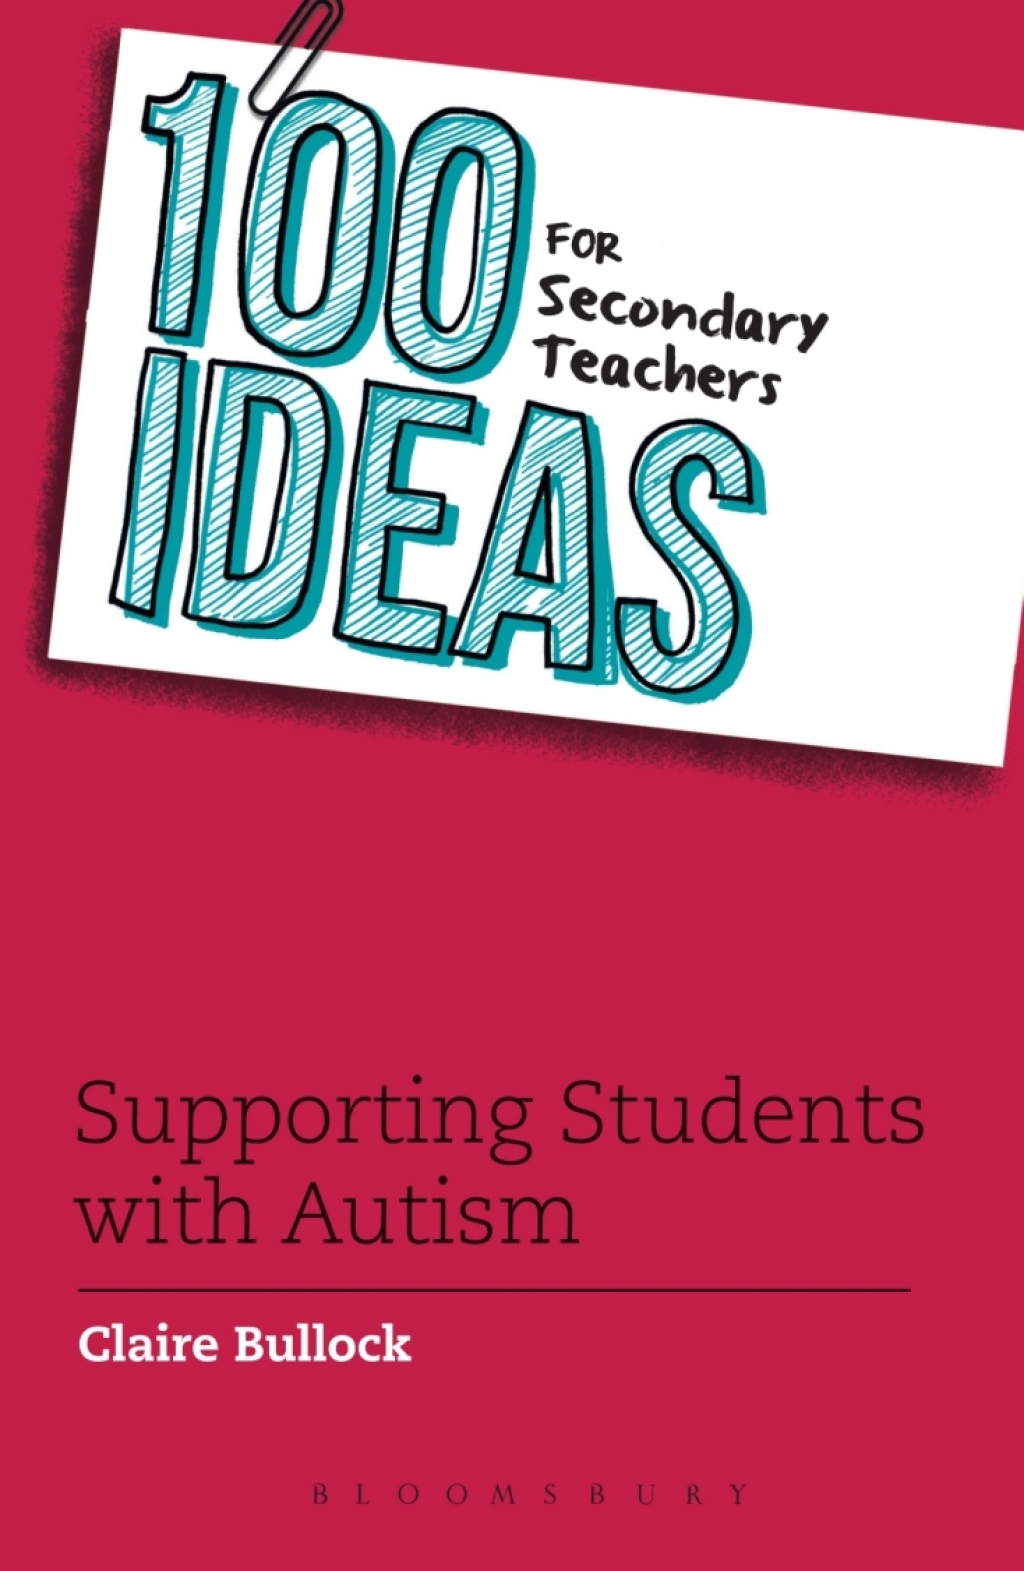 100 Ideas for Secondary Teachers: Supporting Students with Autism - 1st Edition (eBook)